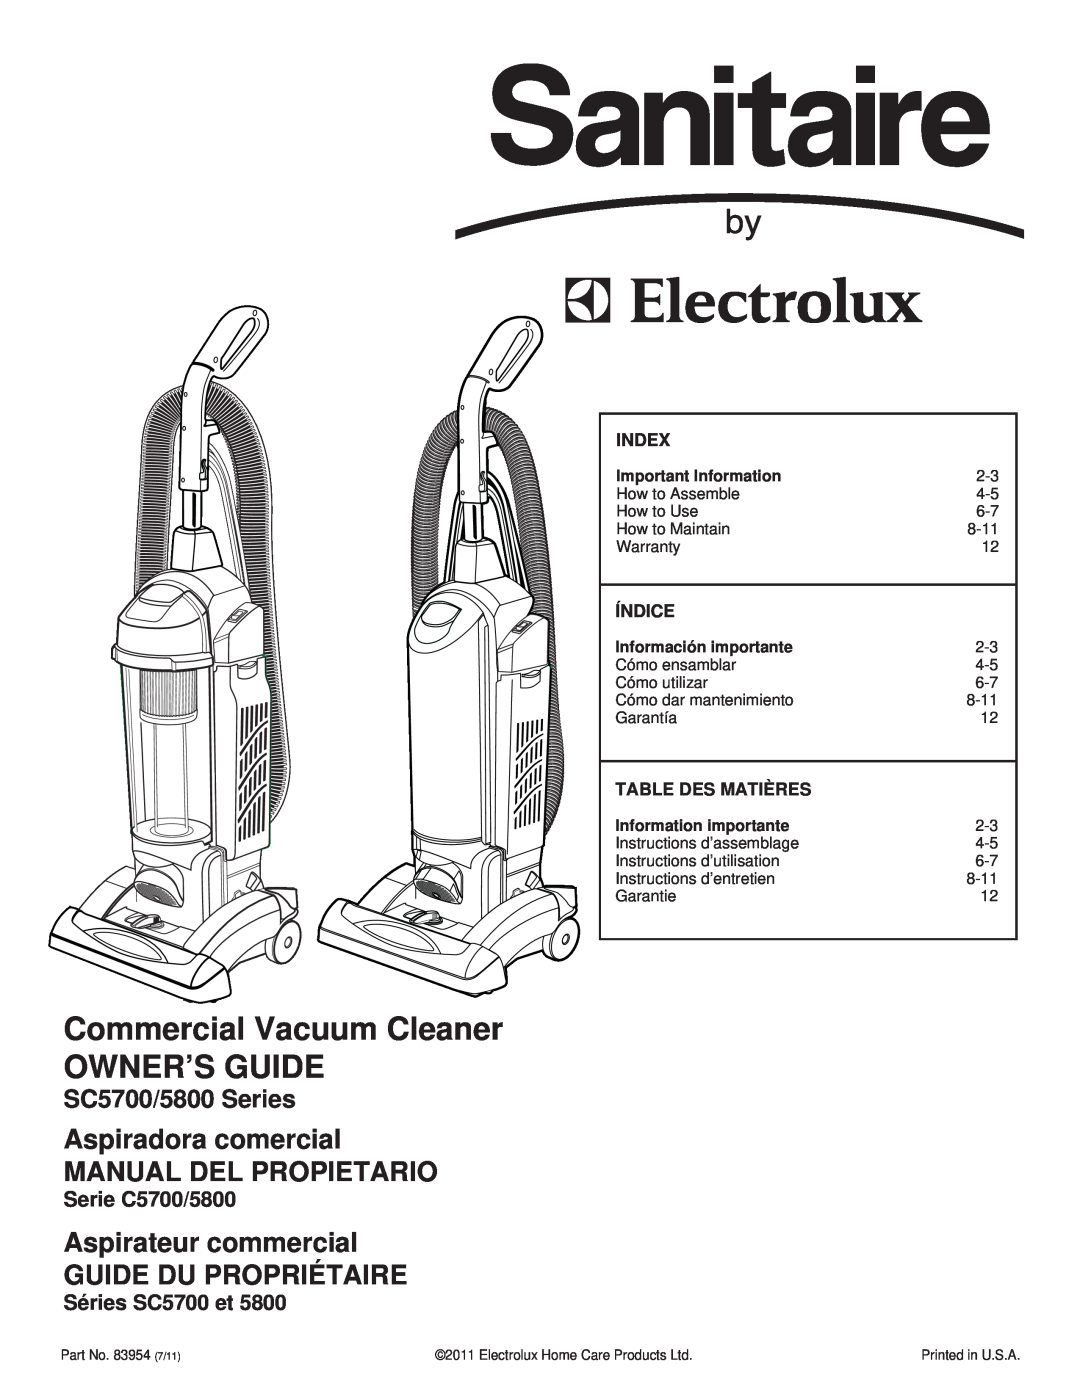 Electrolux SC5700/5800 SERIES warranty Commercial Vacuum Cleaner OWNER’S GUIDE, SC5700/5800 Series, Serie C5700/5800 